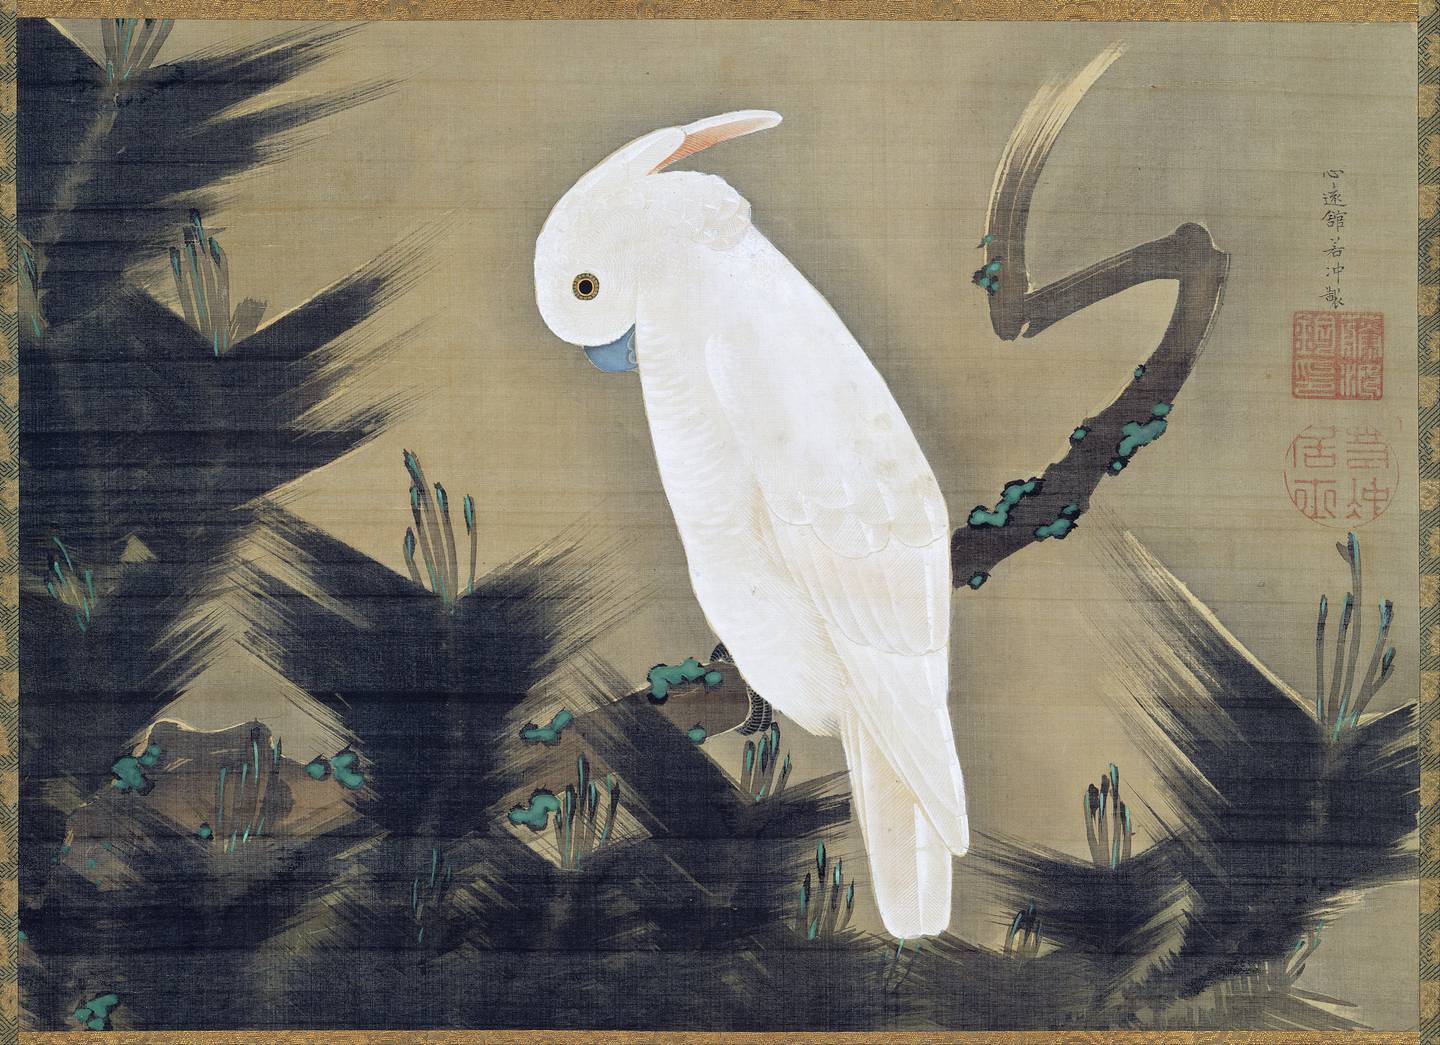 Drawing on his studies of the Japanese masters, such as Ito Jakuchu, pictured, as well as modern pop culture, Takashi Murakami tugged at a thread of continuity running through the Japanese visual language, to create his Superflat style. Getty Images